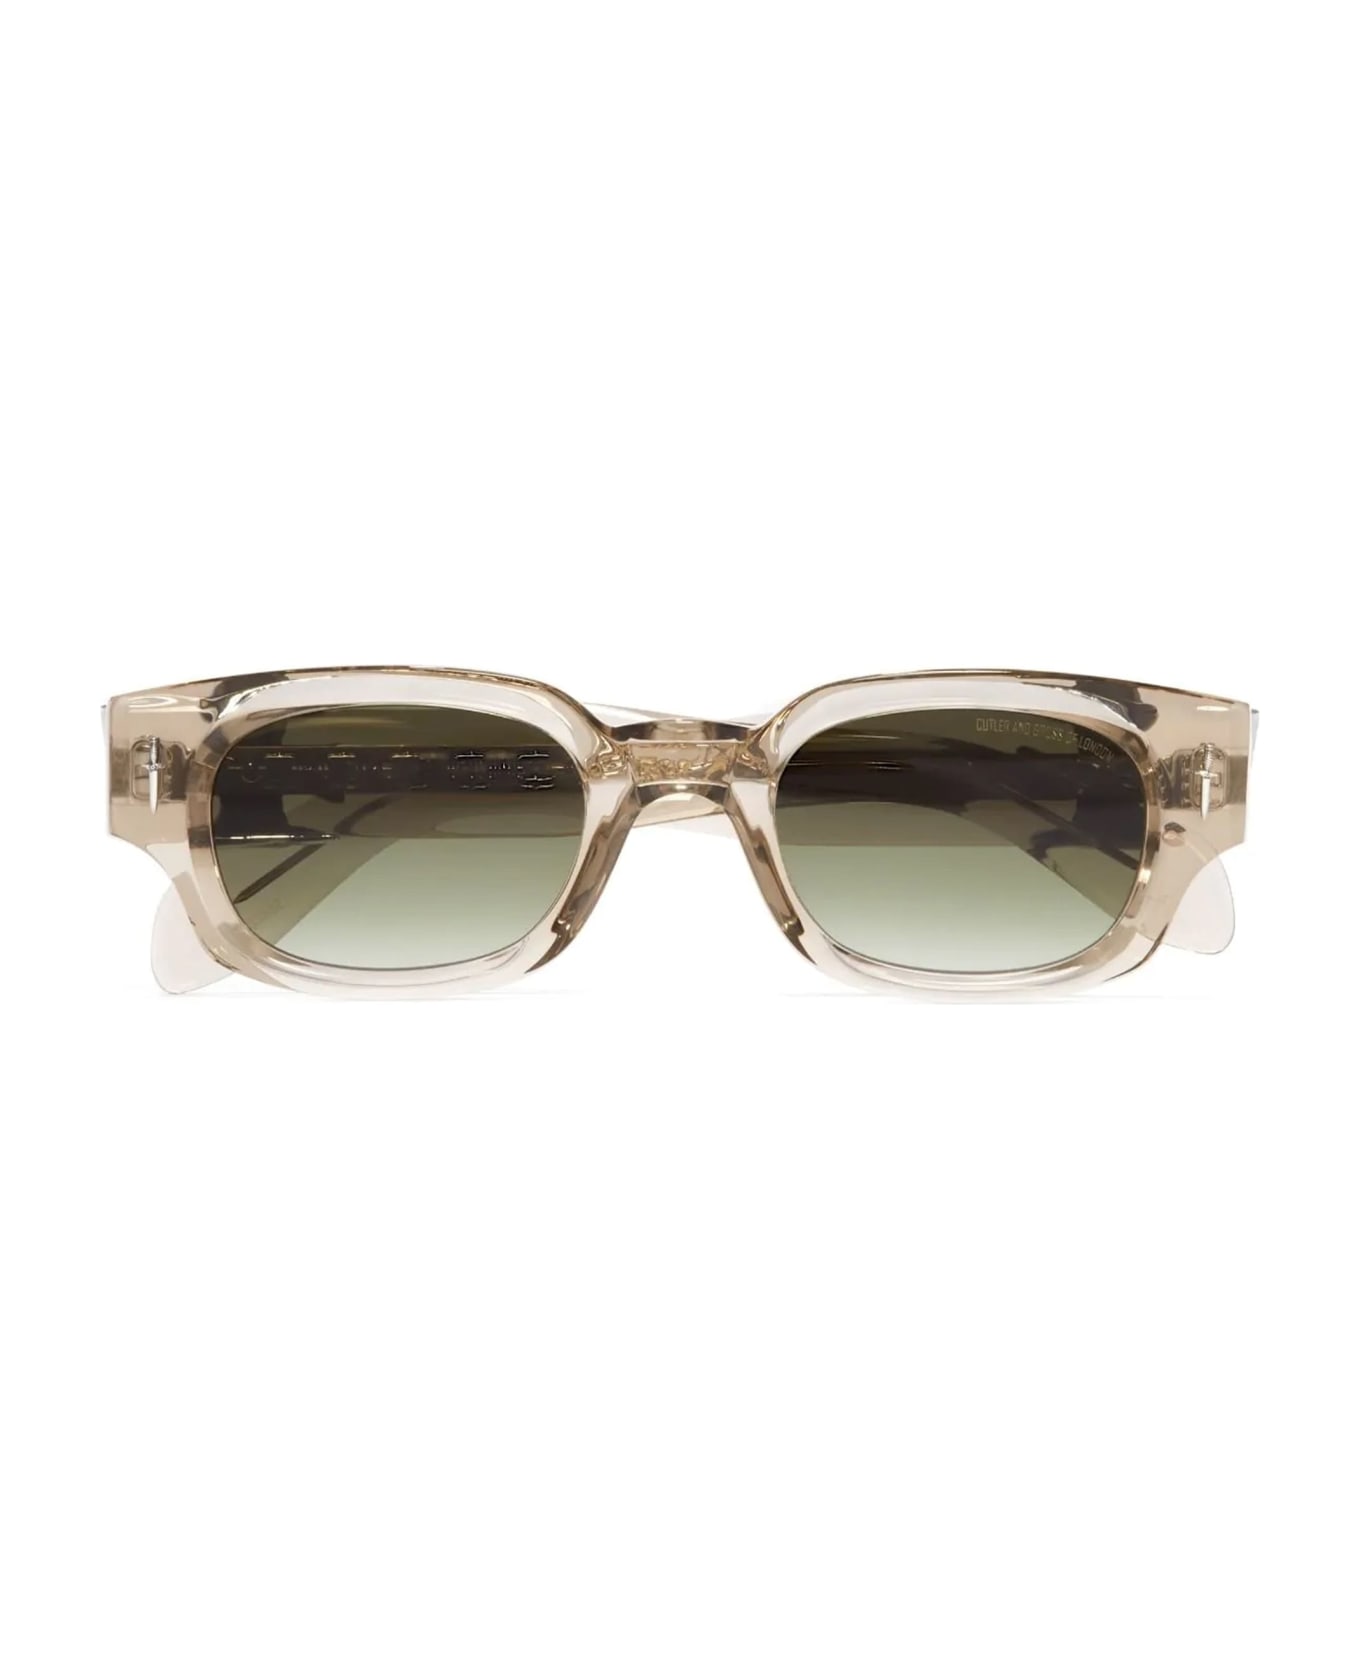 Cutler and Gross The Great Frog - Soaring Eagle / Sand Crystal Sunglasses - transparent beige サングラス